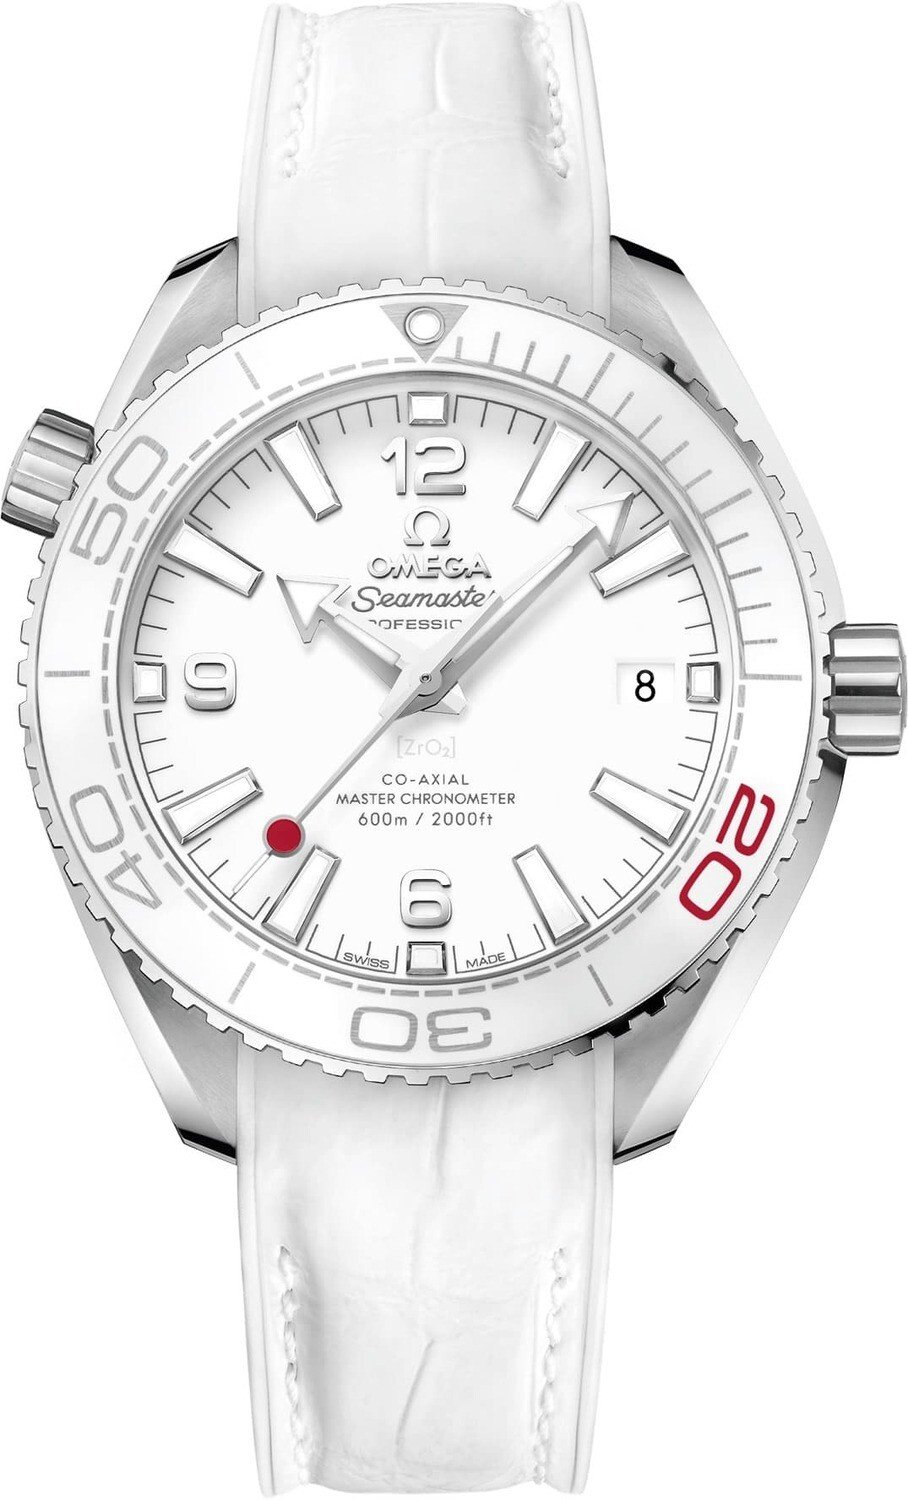 Omega Seamaster Planet Ocean Tokyo 2020 Limited Edition	